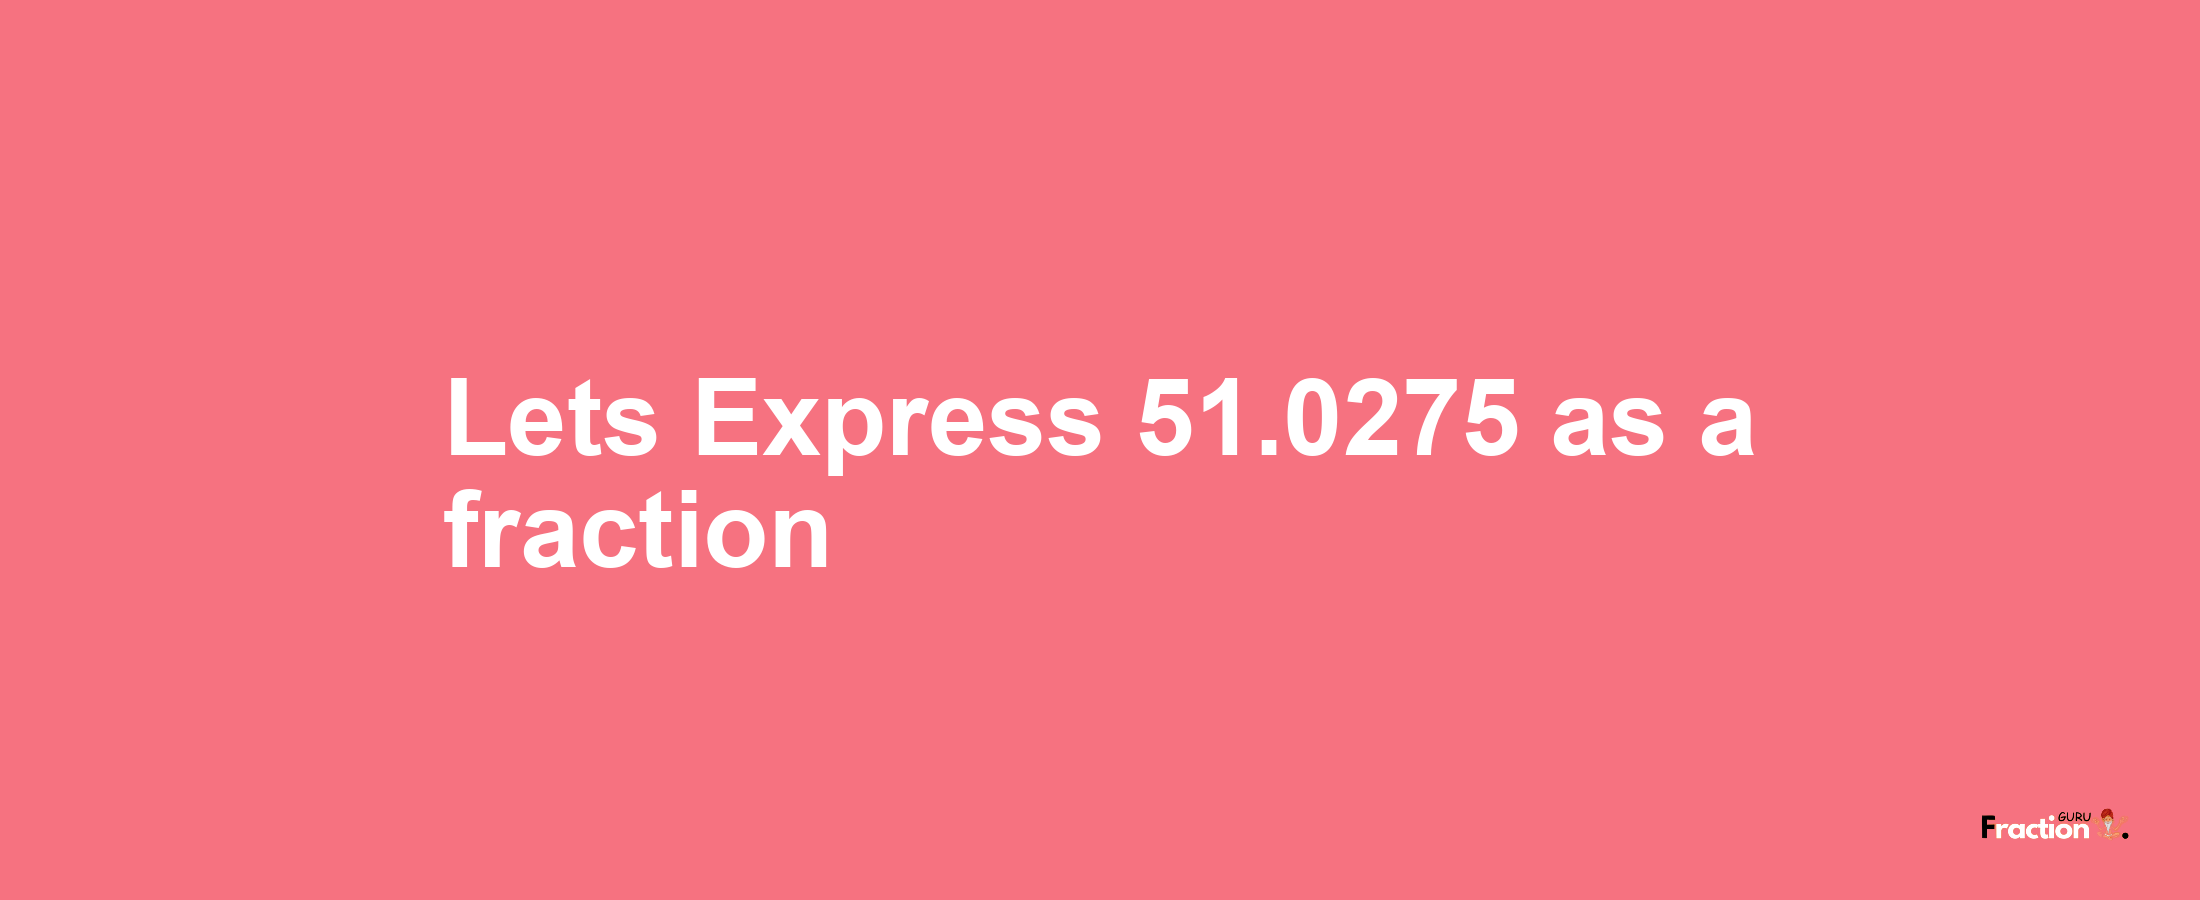 Lets Express 51.0275 as afraction